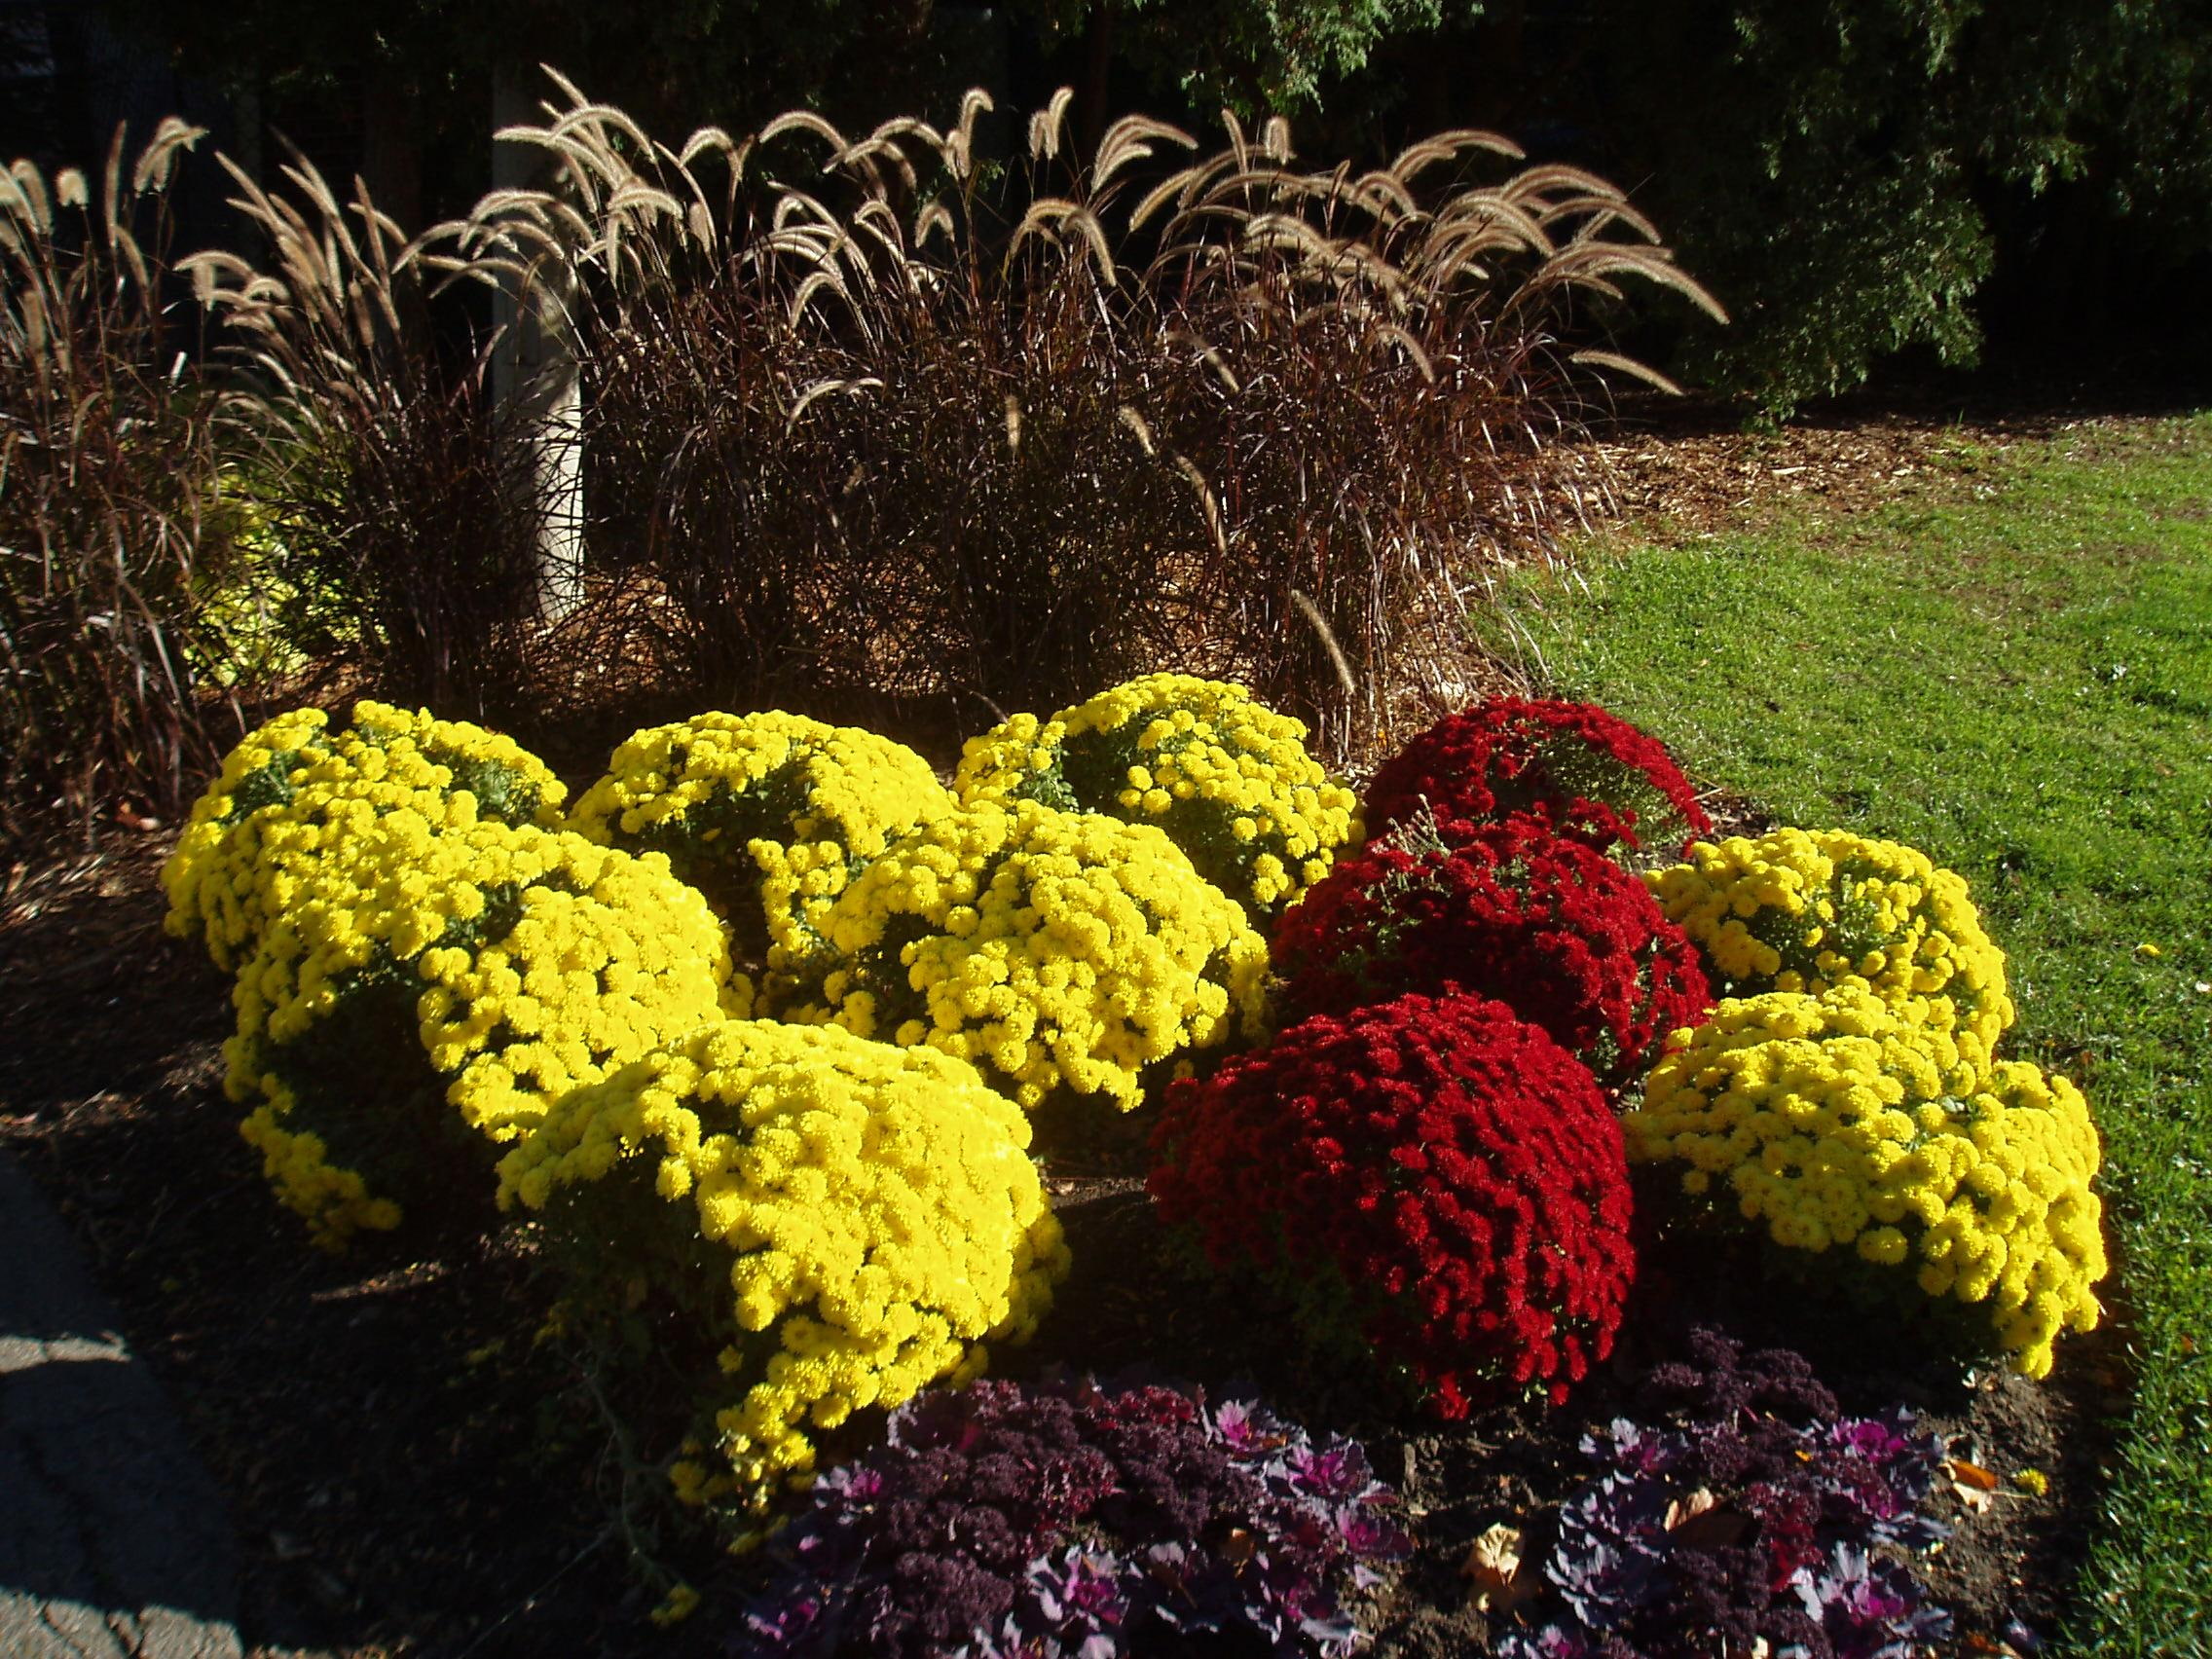 Mums, colours, autumn finery, quiet corner, fall beauties, 3d and abstract